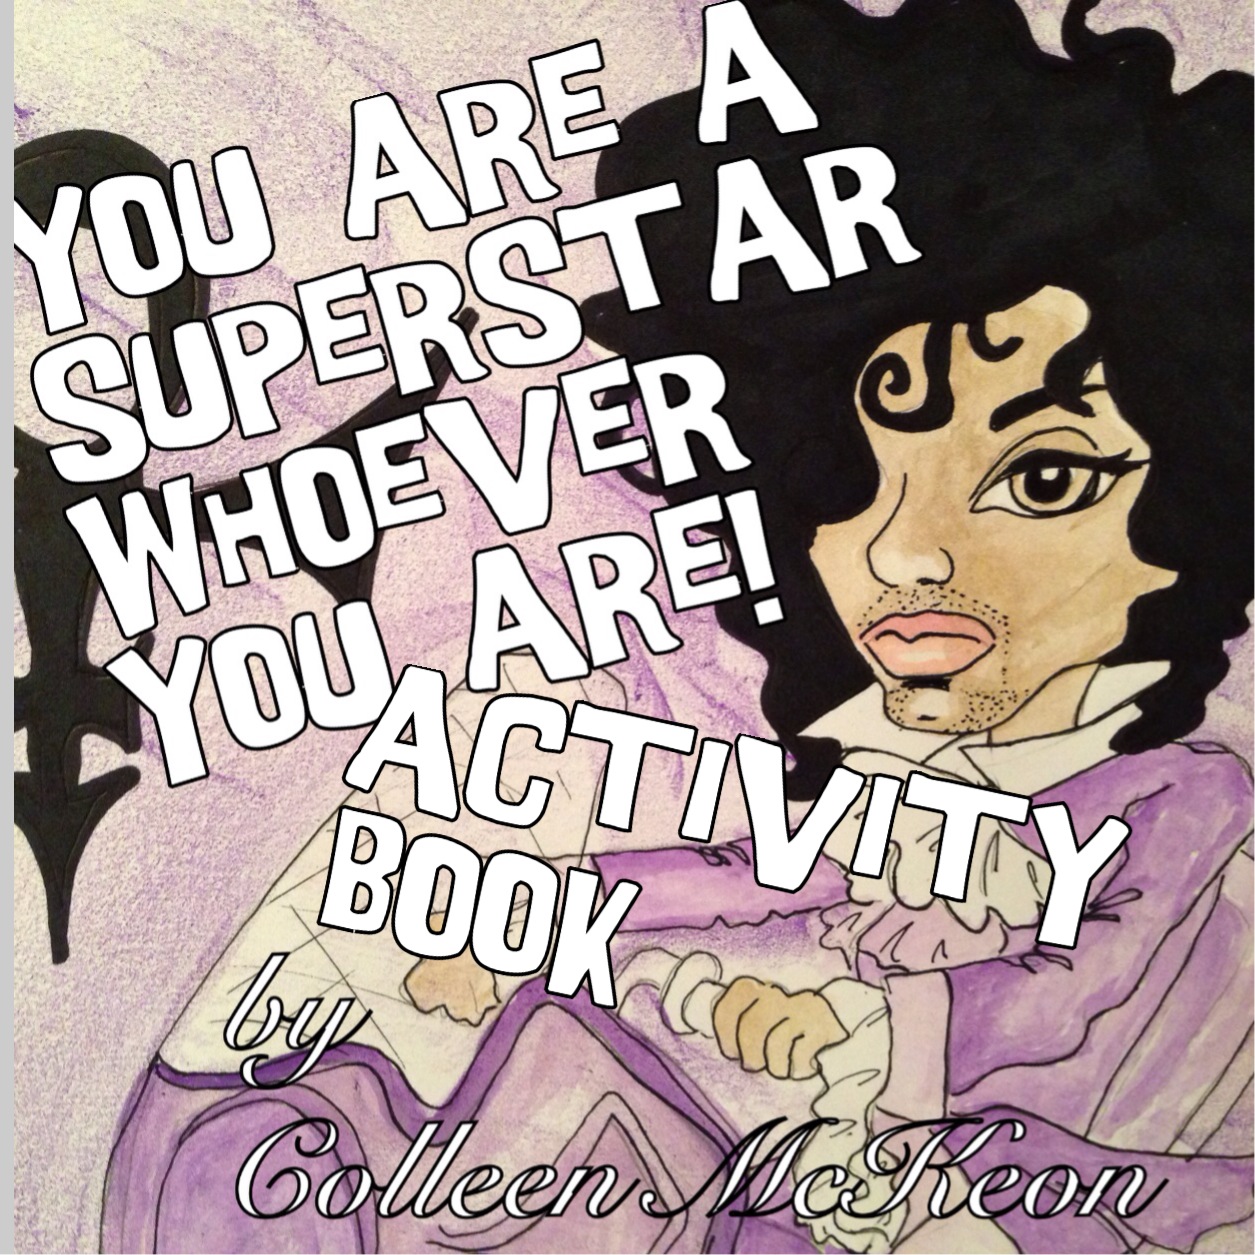 ACTIVITY BOOK for "YOU ARE A SUPERSTAR WHOEVER YOU ARE!" - Book 1